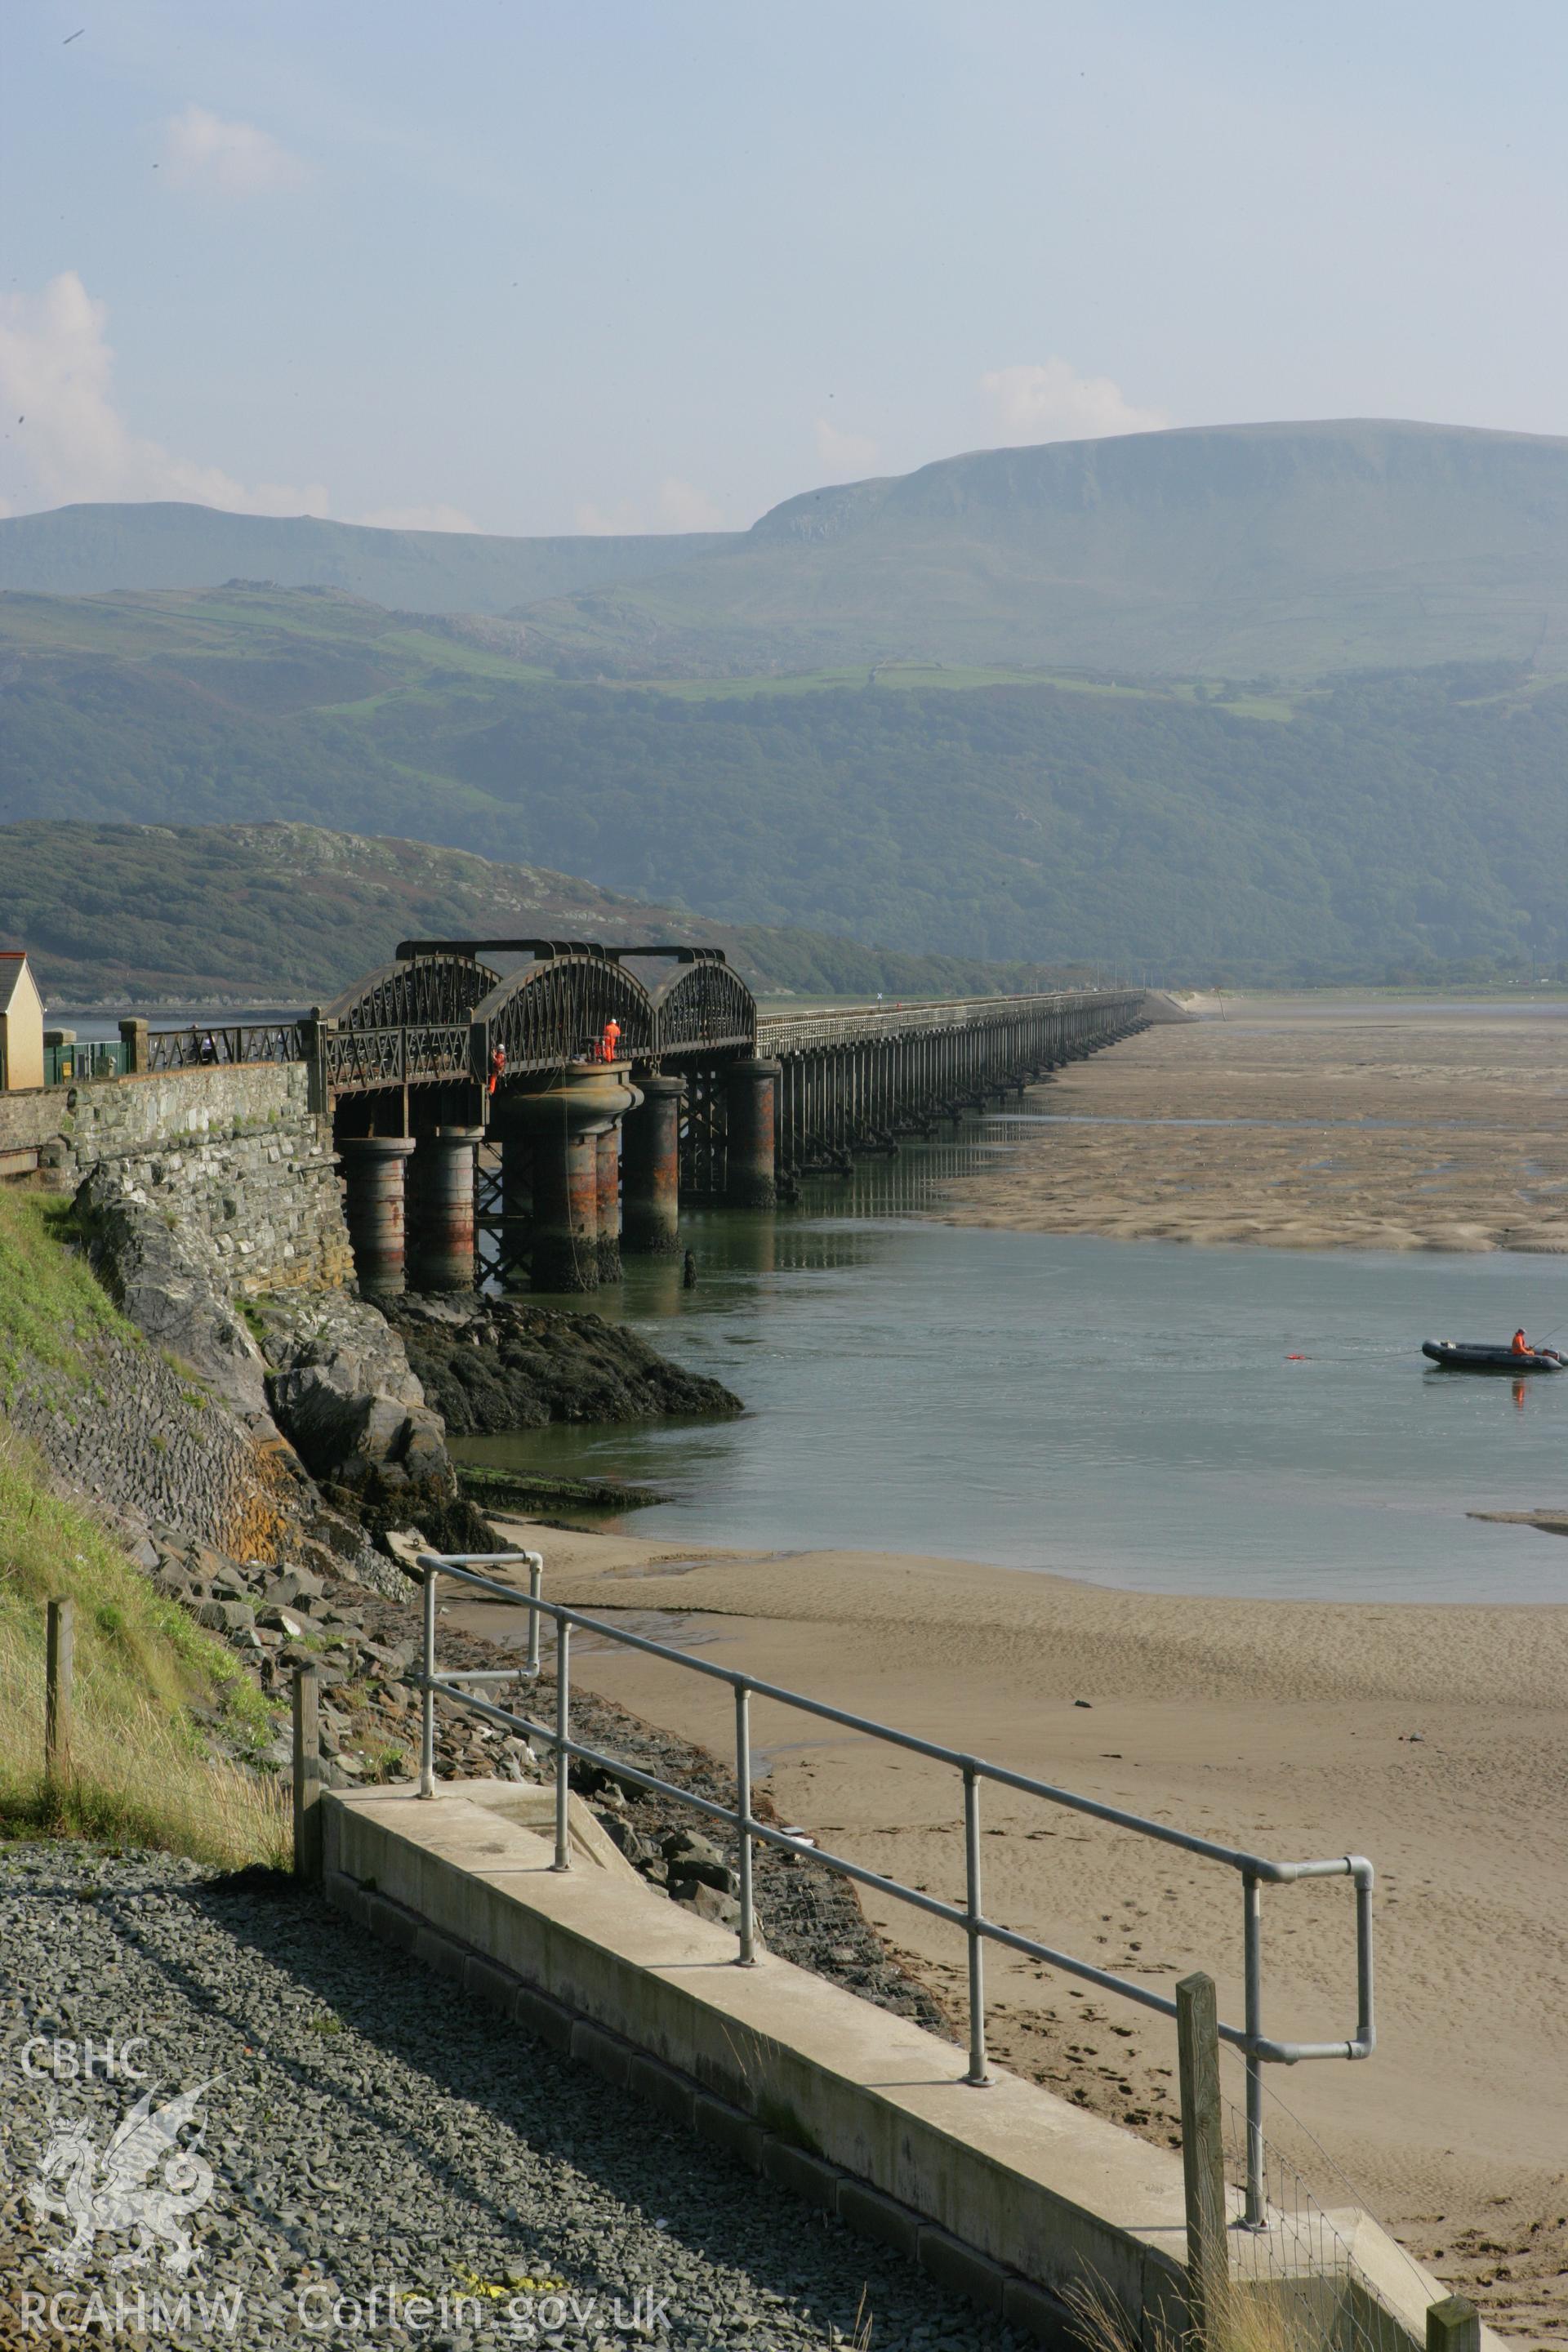 Photographic survey north-west end of Barmouth Railway Viaduct conducted on 19th September 2008.